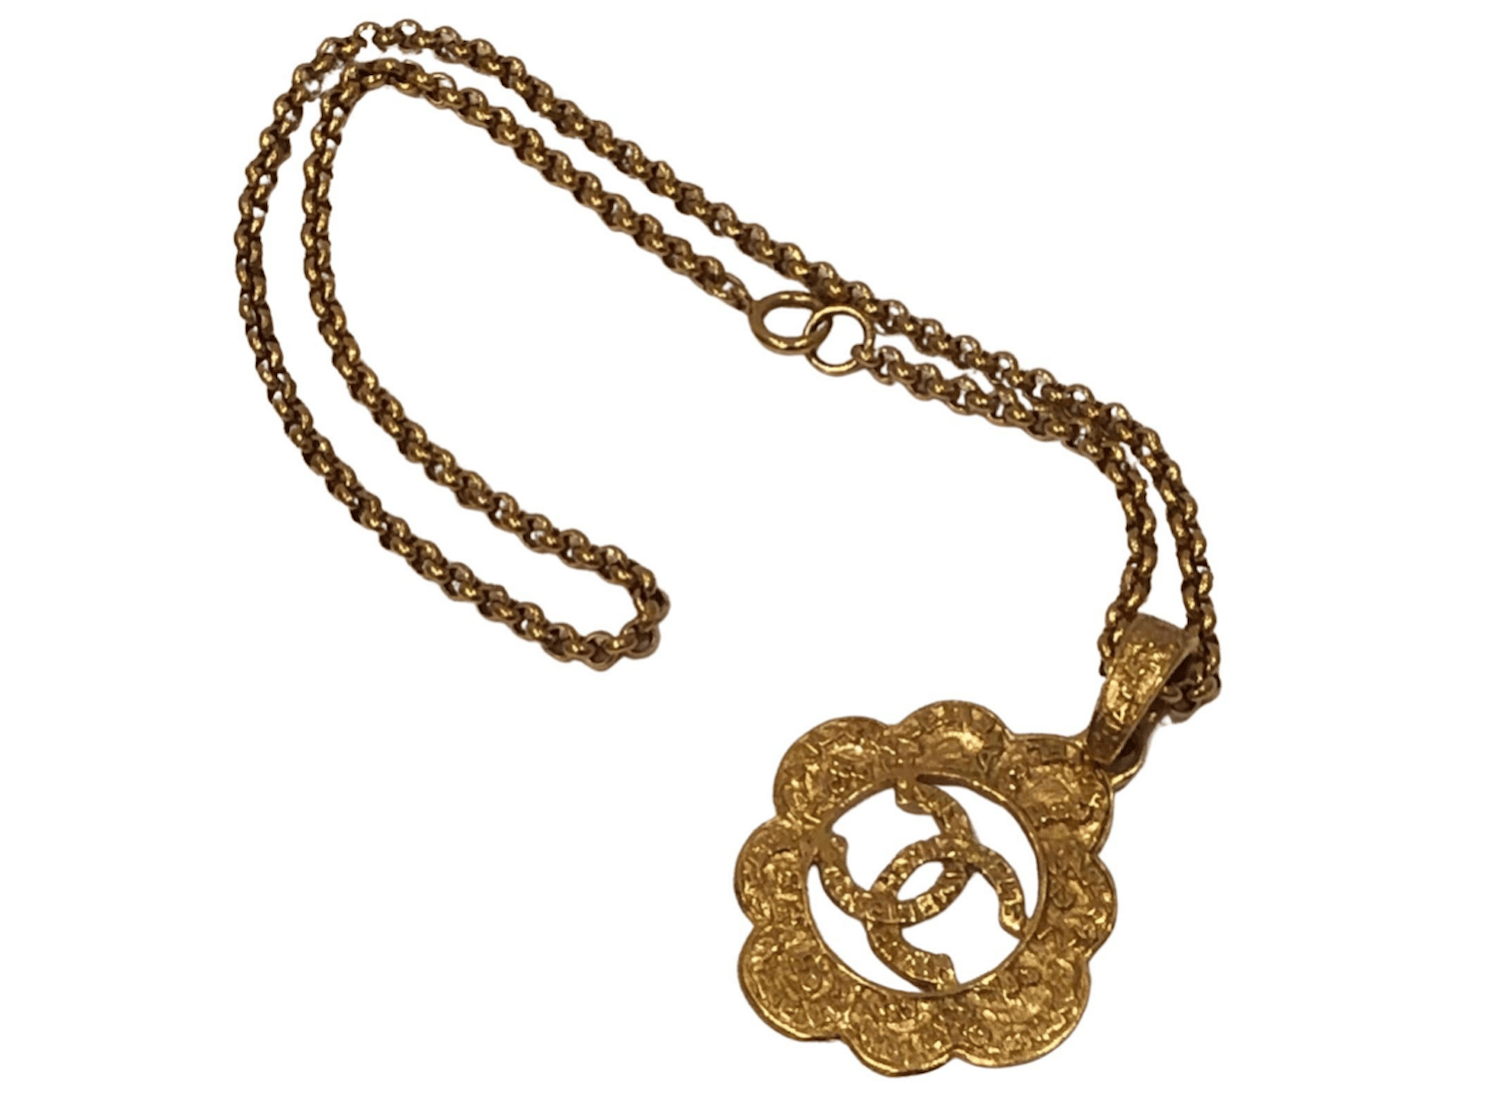 Vintage CHANEL Golden Chain Necklace With Dangling Hat Top  Etsy